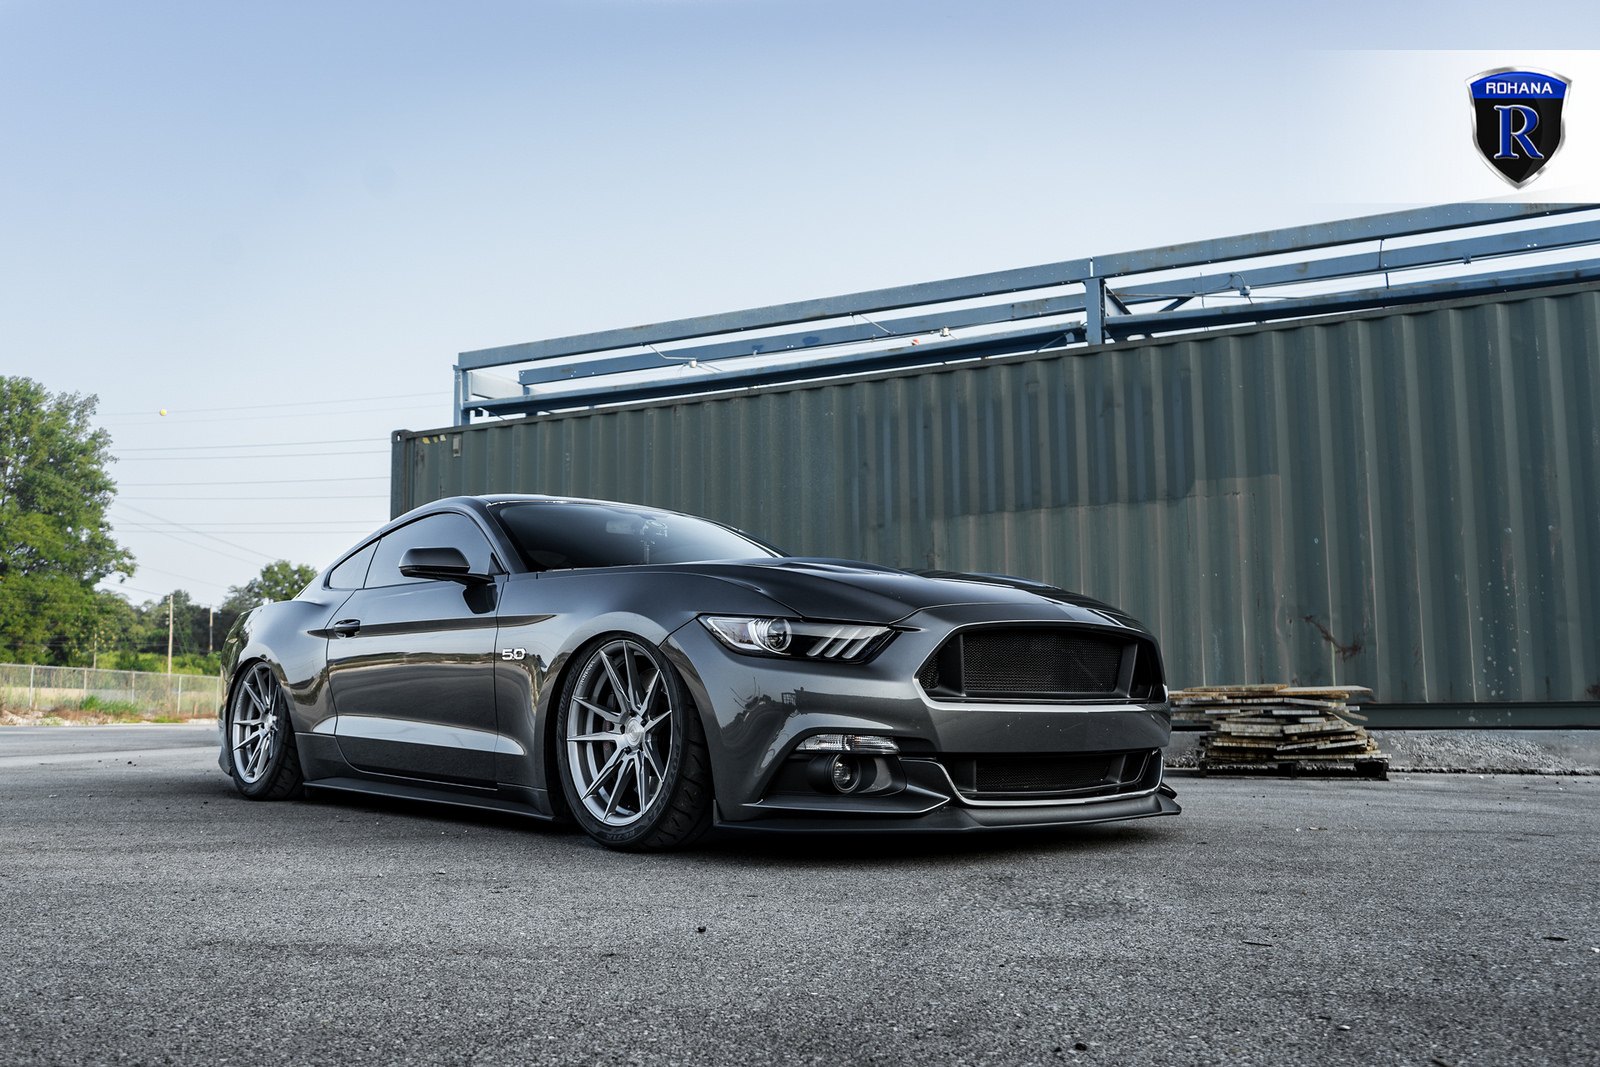 Aftermarket Front Bumper on Gray Ford Mustang 5.0 - Photo by Rohana Wheels